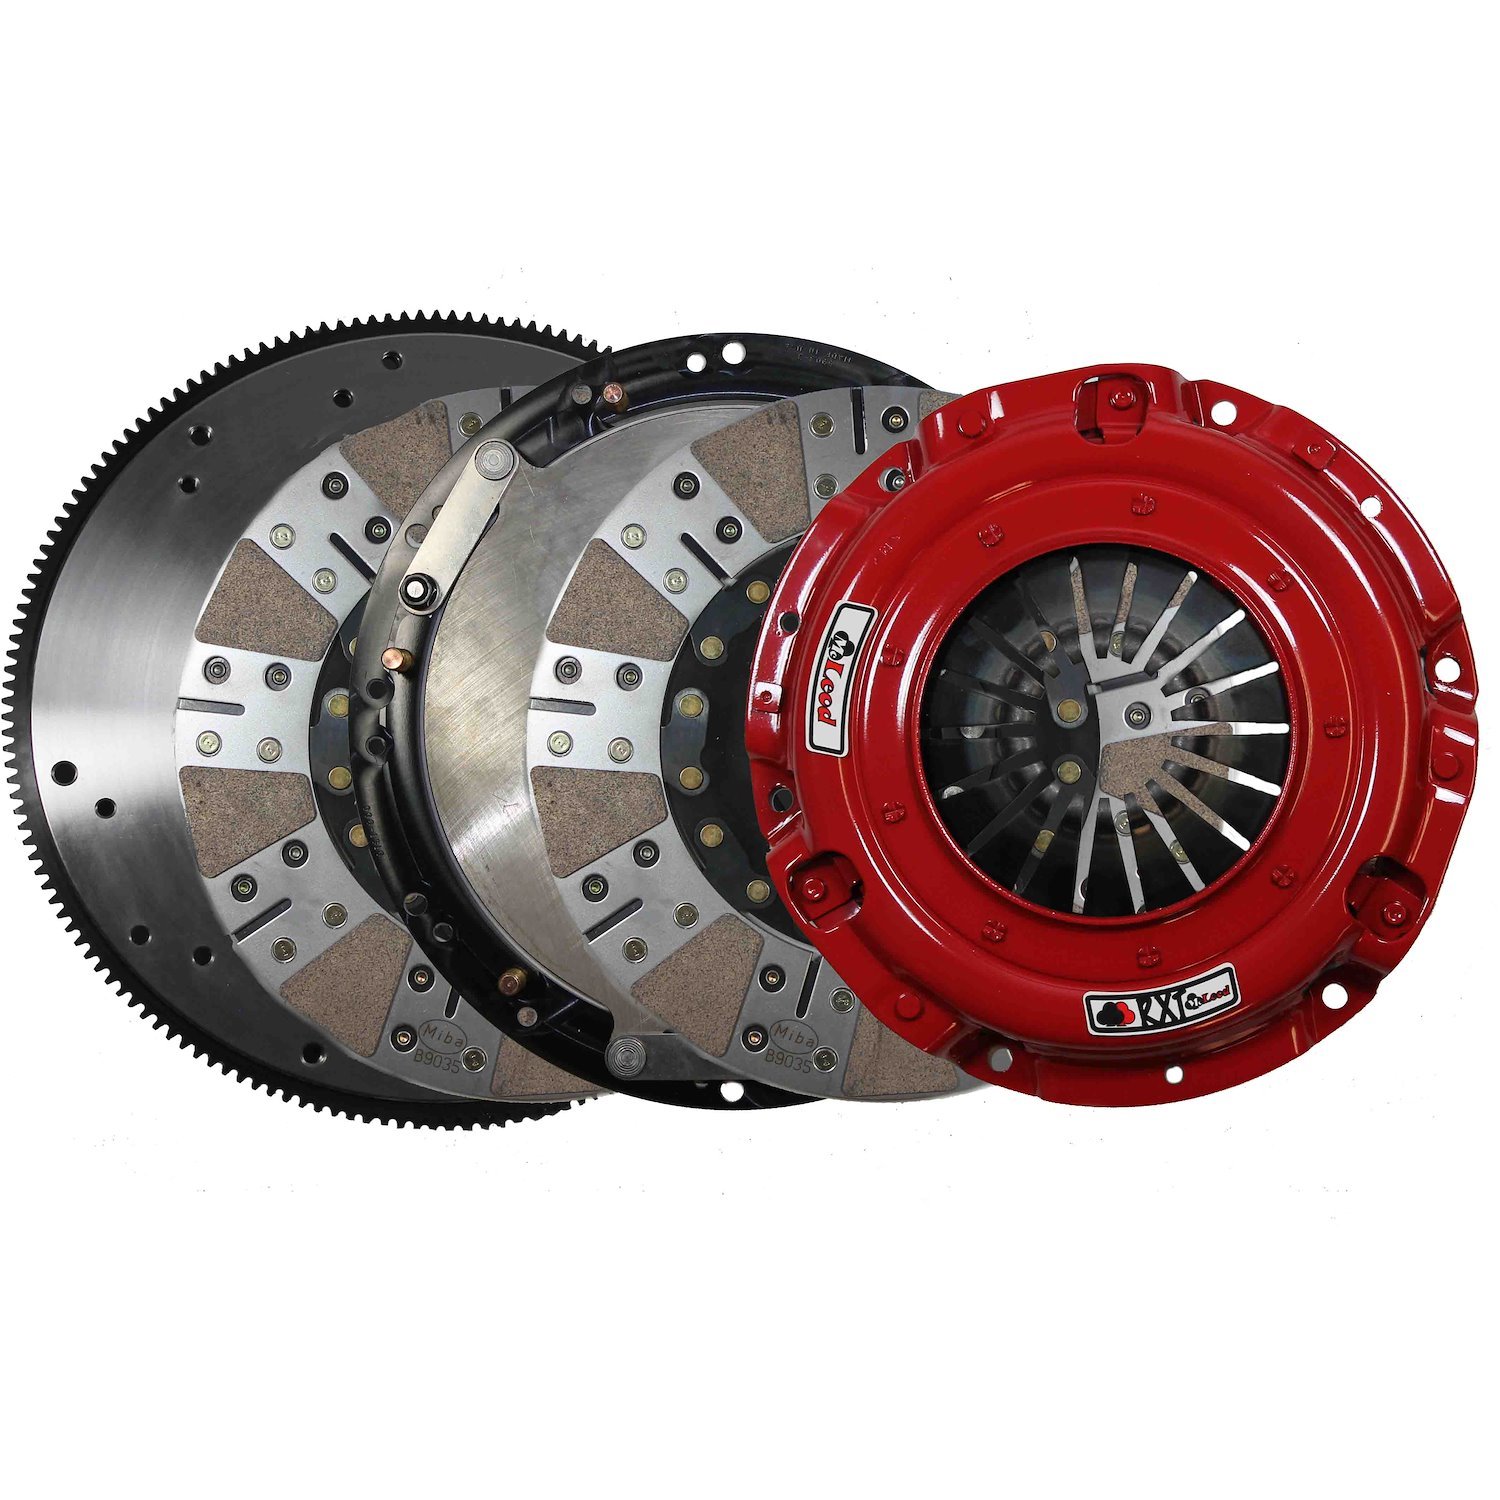 Power Pack RXT 1200 Twin Disc Clutch Kit [2011-2017 Ford Coyote 5.0L V8]